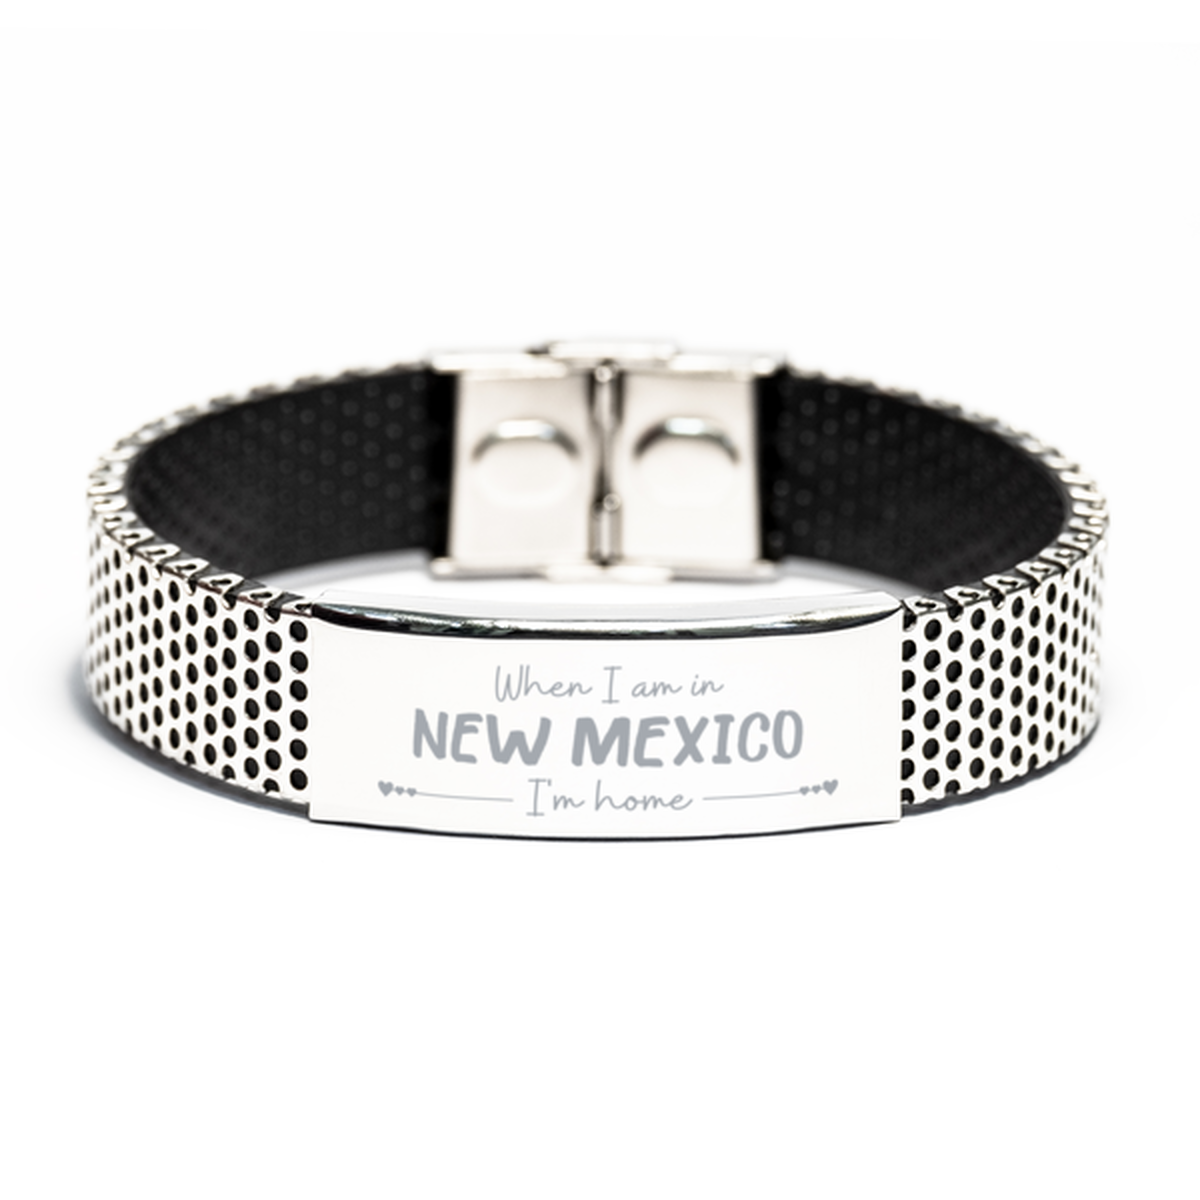 When I am in New Mexico I'm home Stainless Steel Bracelet, Cheap Gifts For New Mexico, State New Mexico Birthday Gifts for Friends Coworker